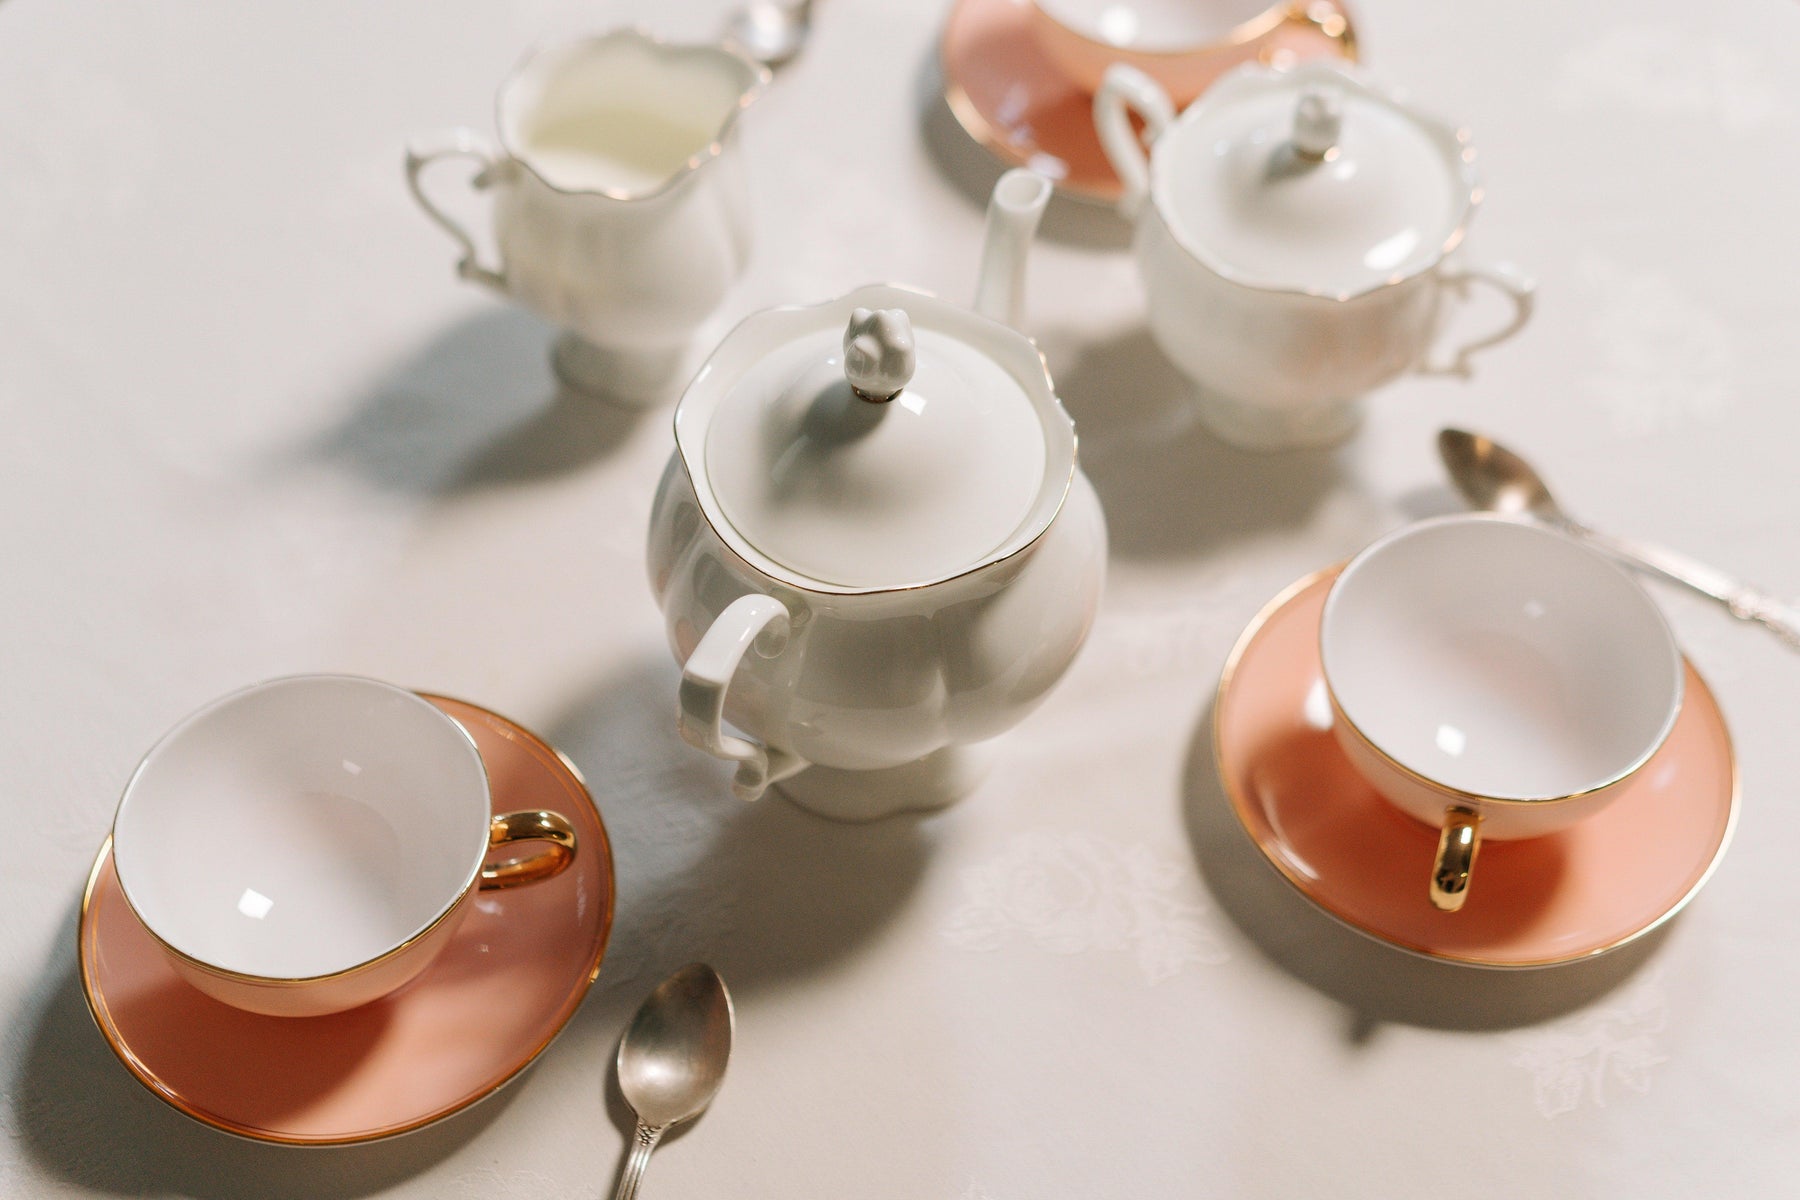 Why Should You Buy A Tea Set Instead of Just Cups? - HauSweet